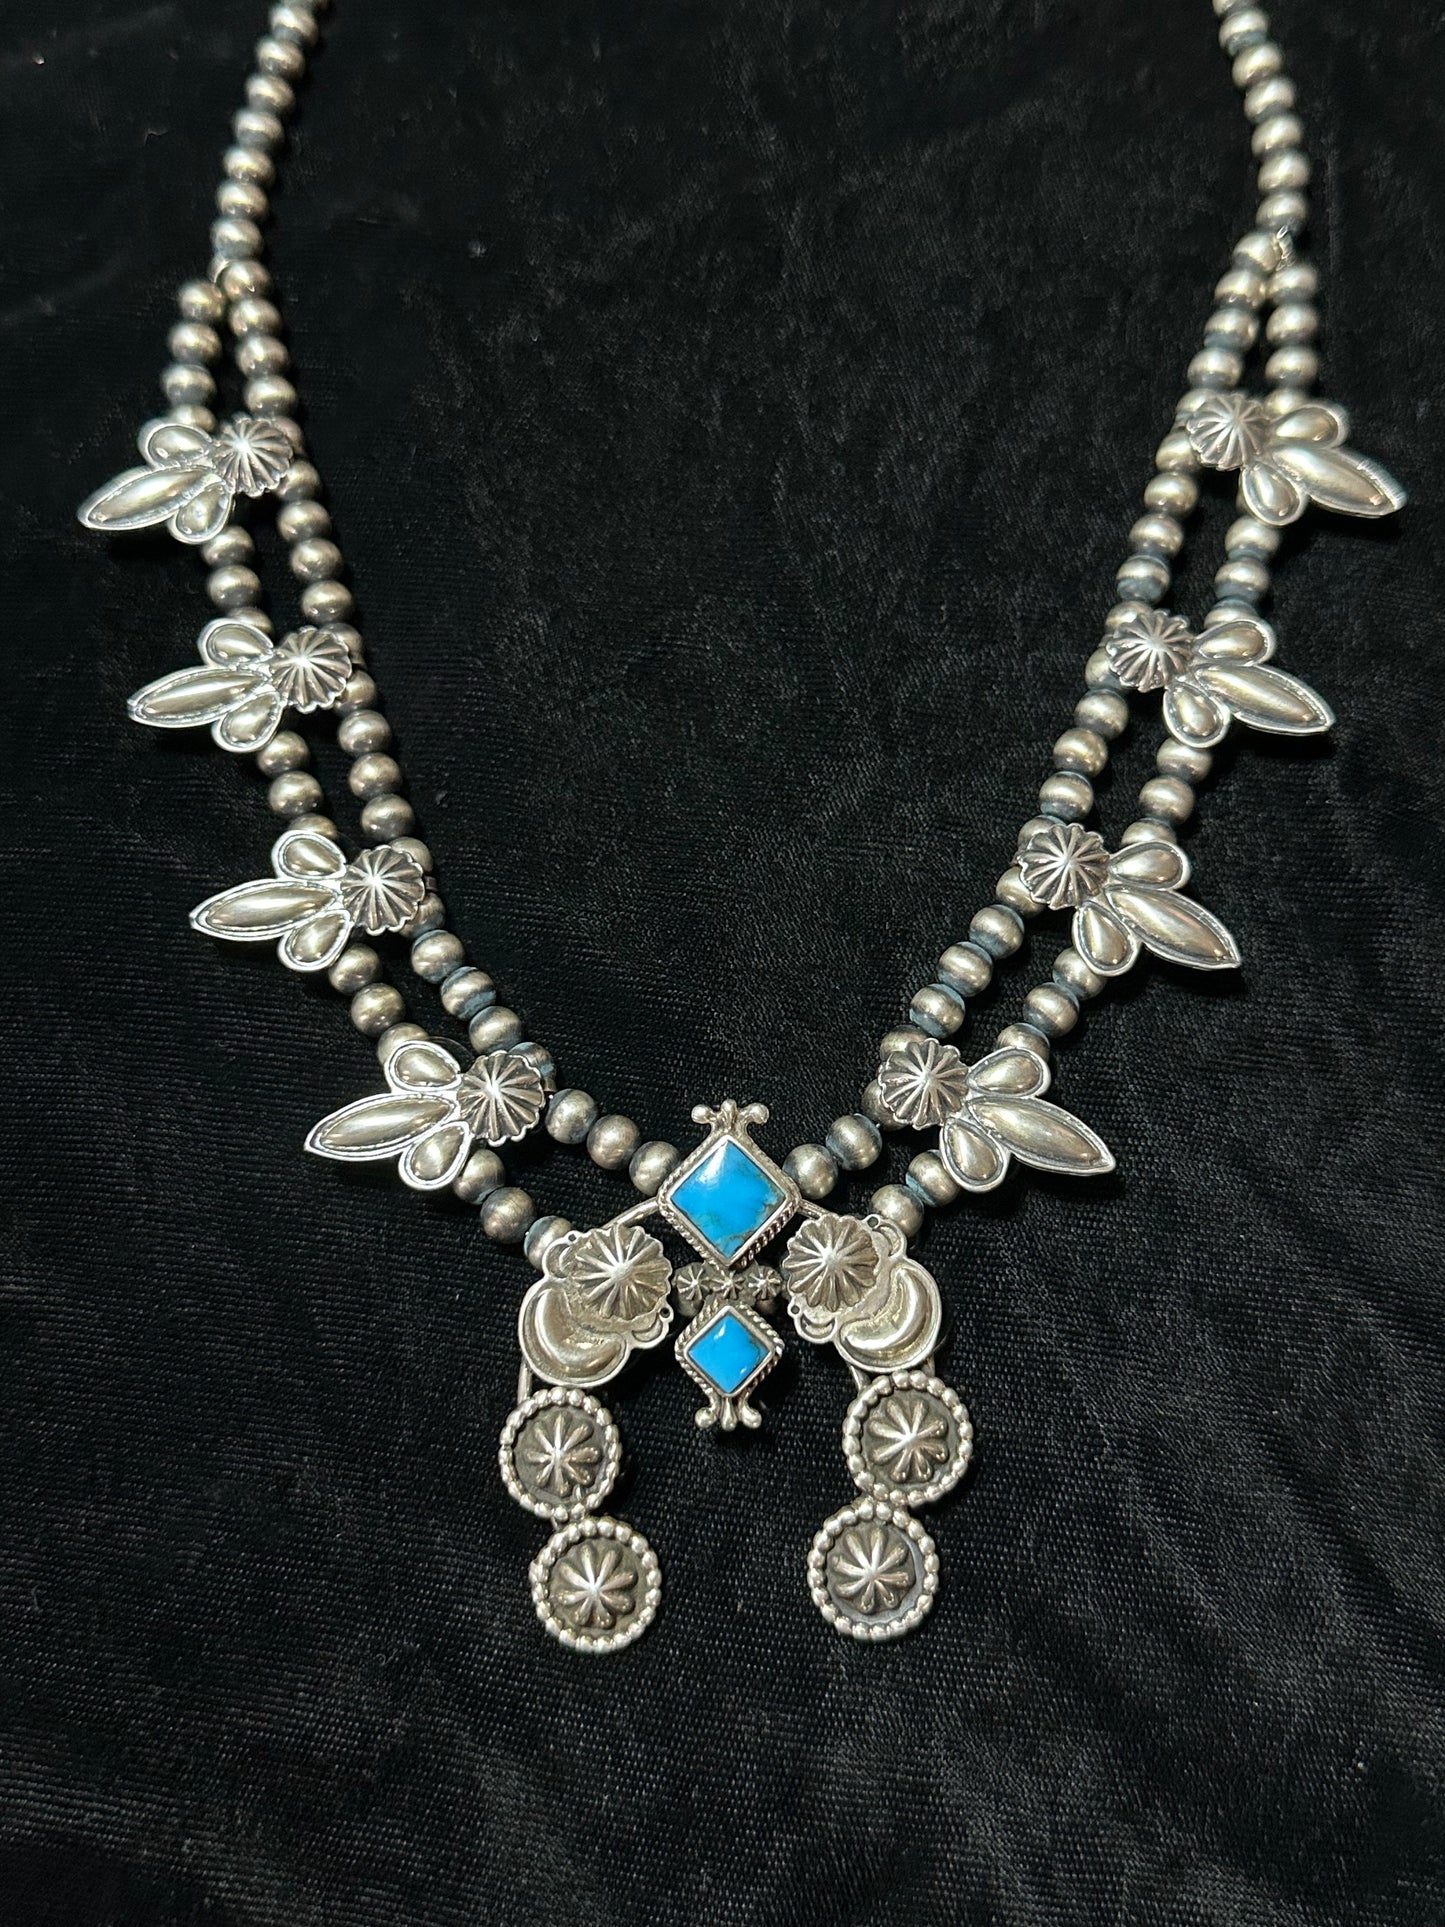 Unique Sterling Silver and Kingman Turquoise Squash Blossom by Quincy Yazzie, Navajo